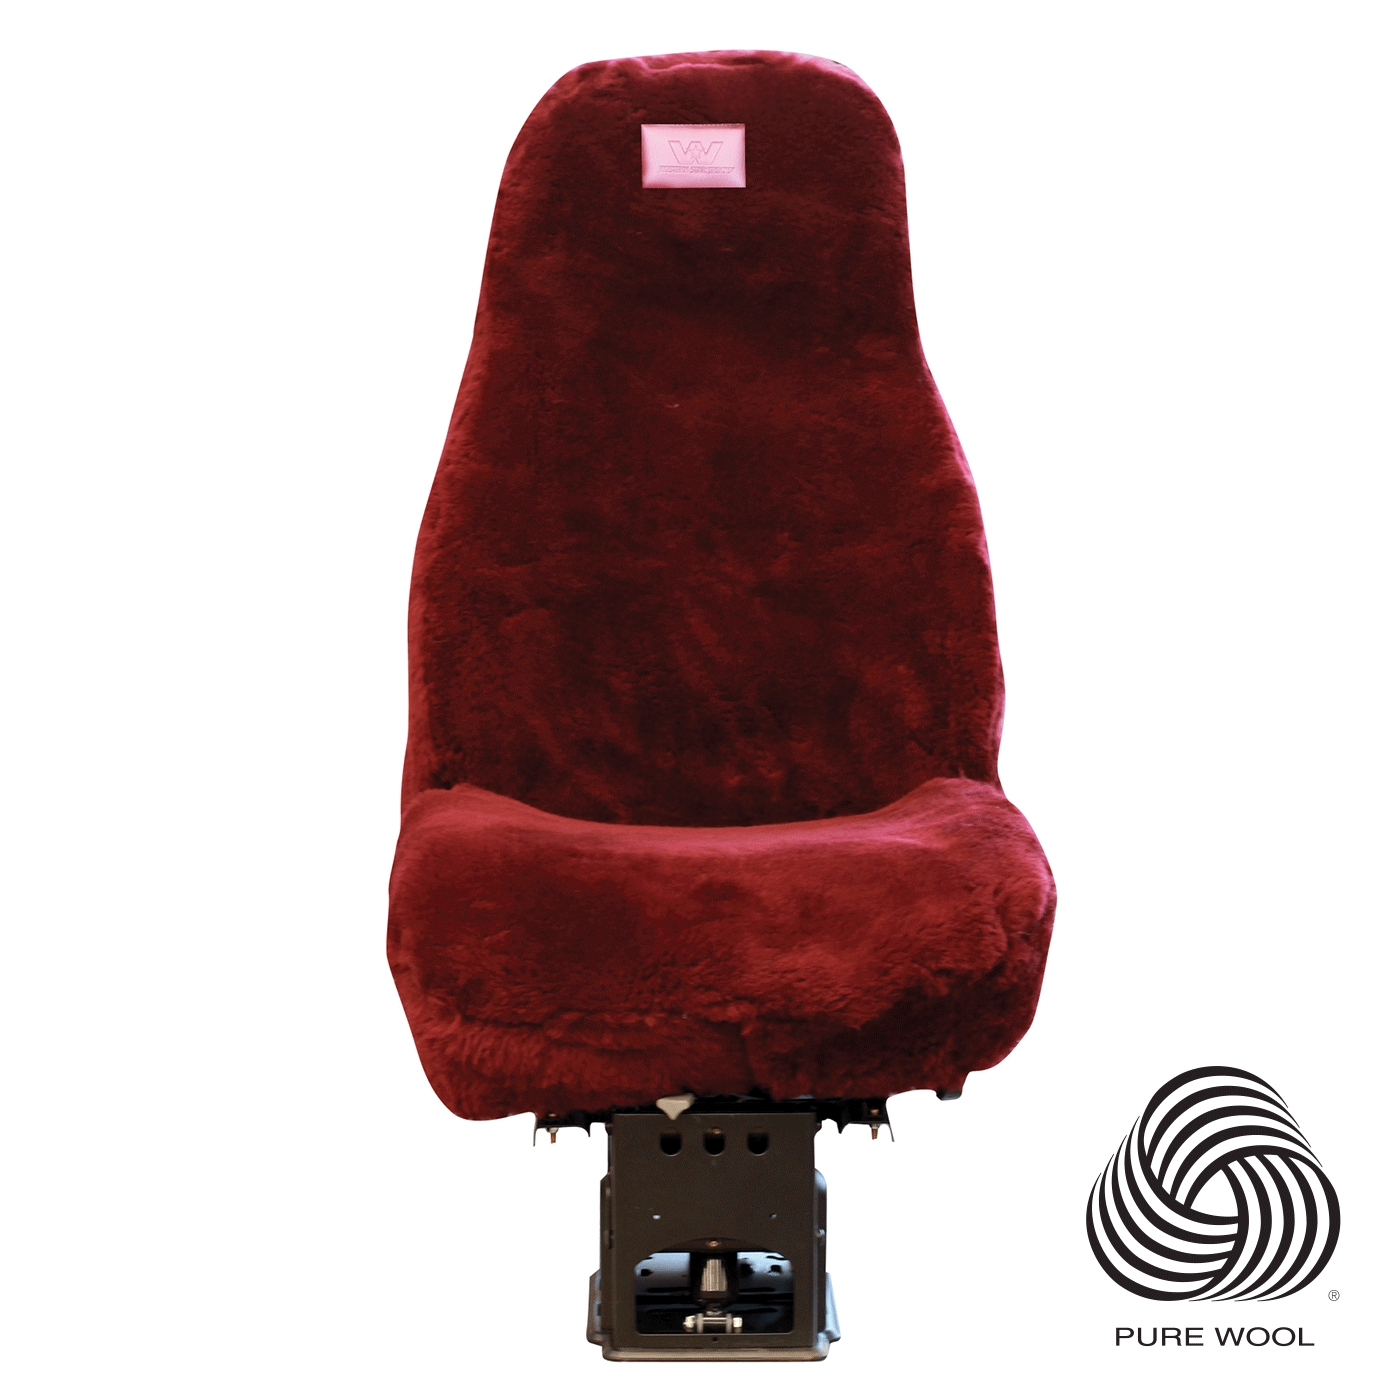 100% Wool seat covers - To suit National High-Back Seats